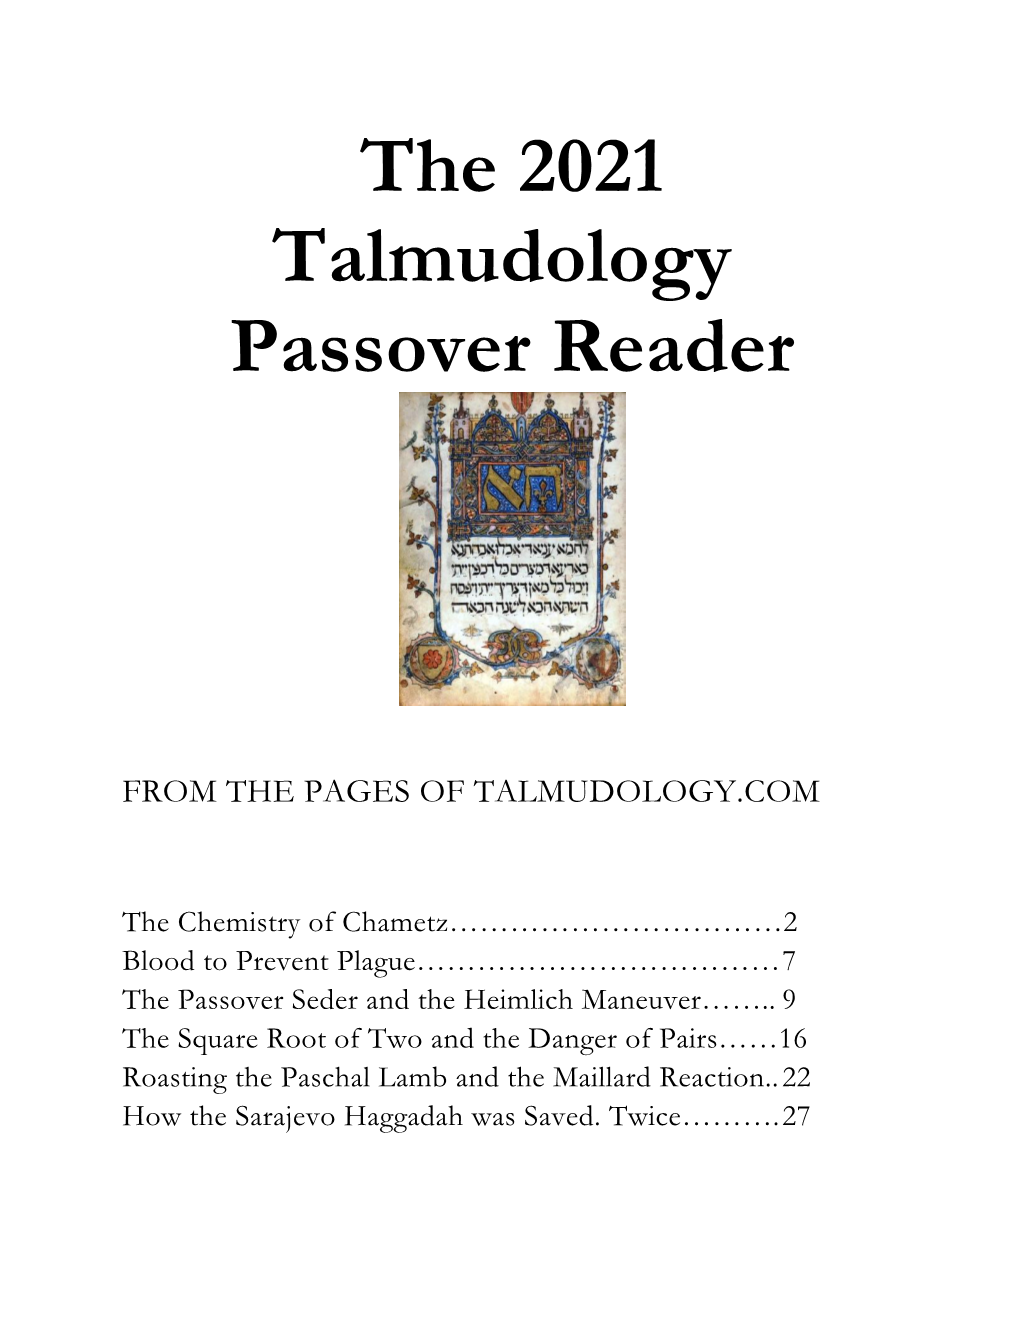 The 2021 Talmudology Passover Reader